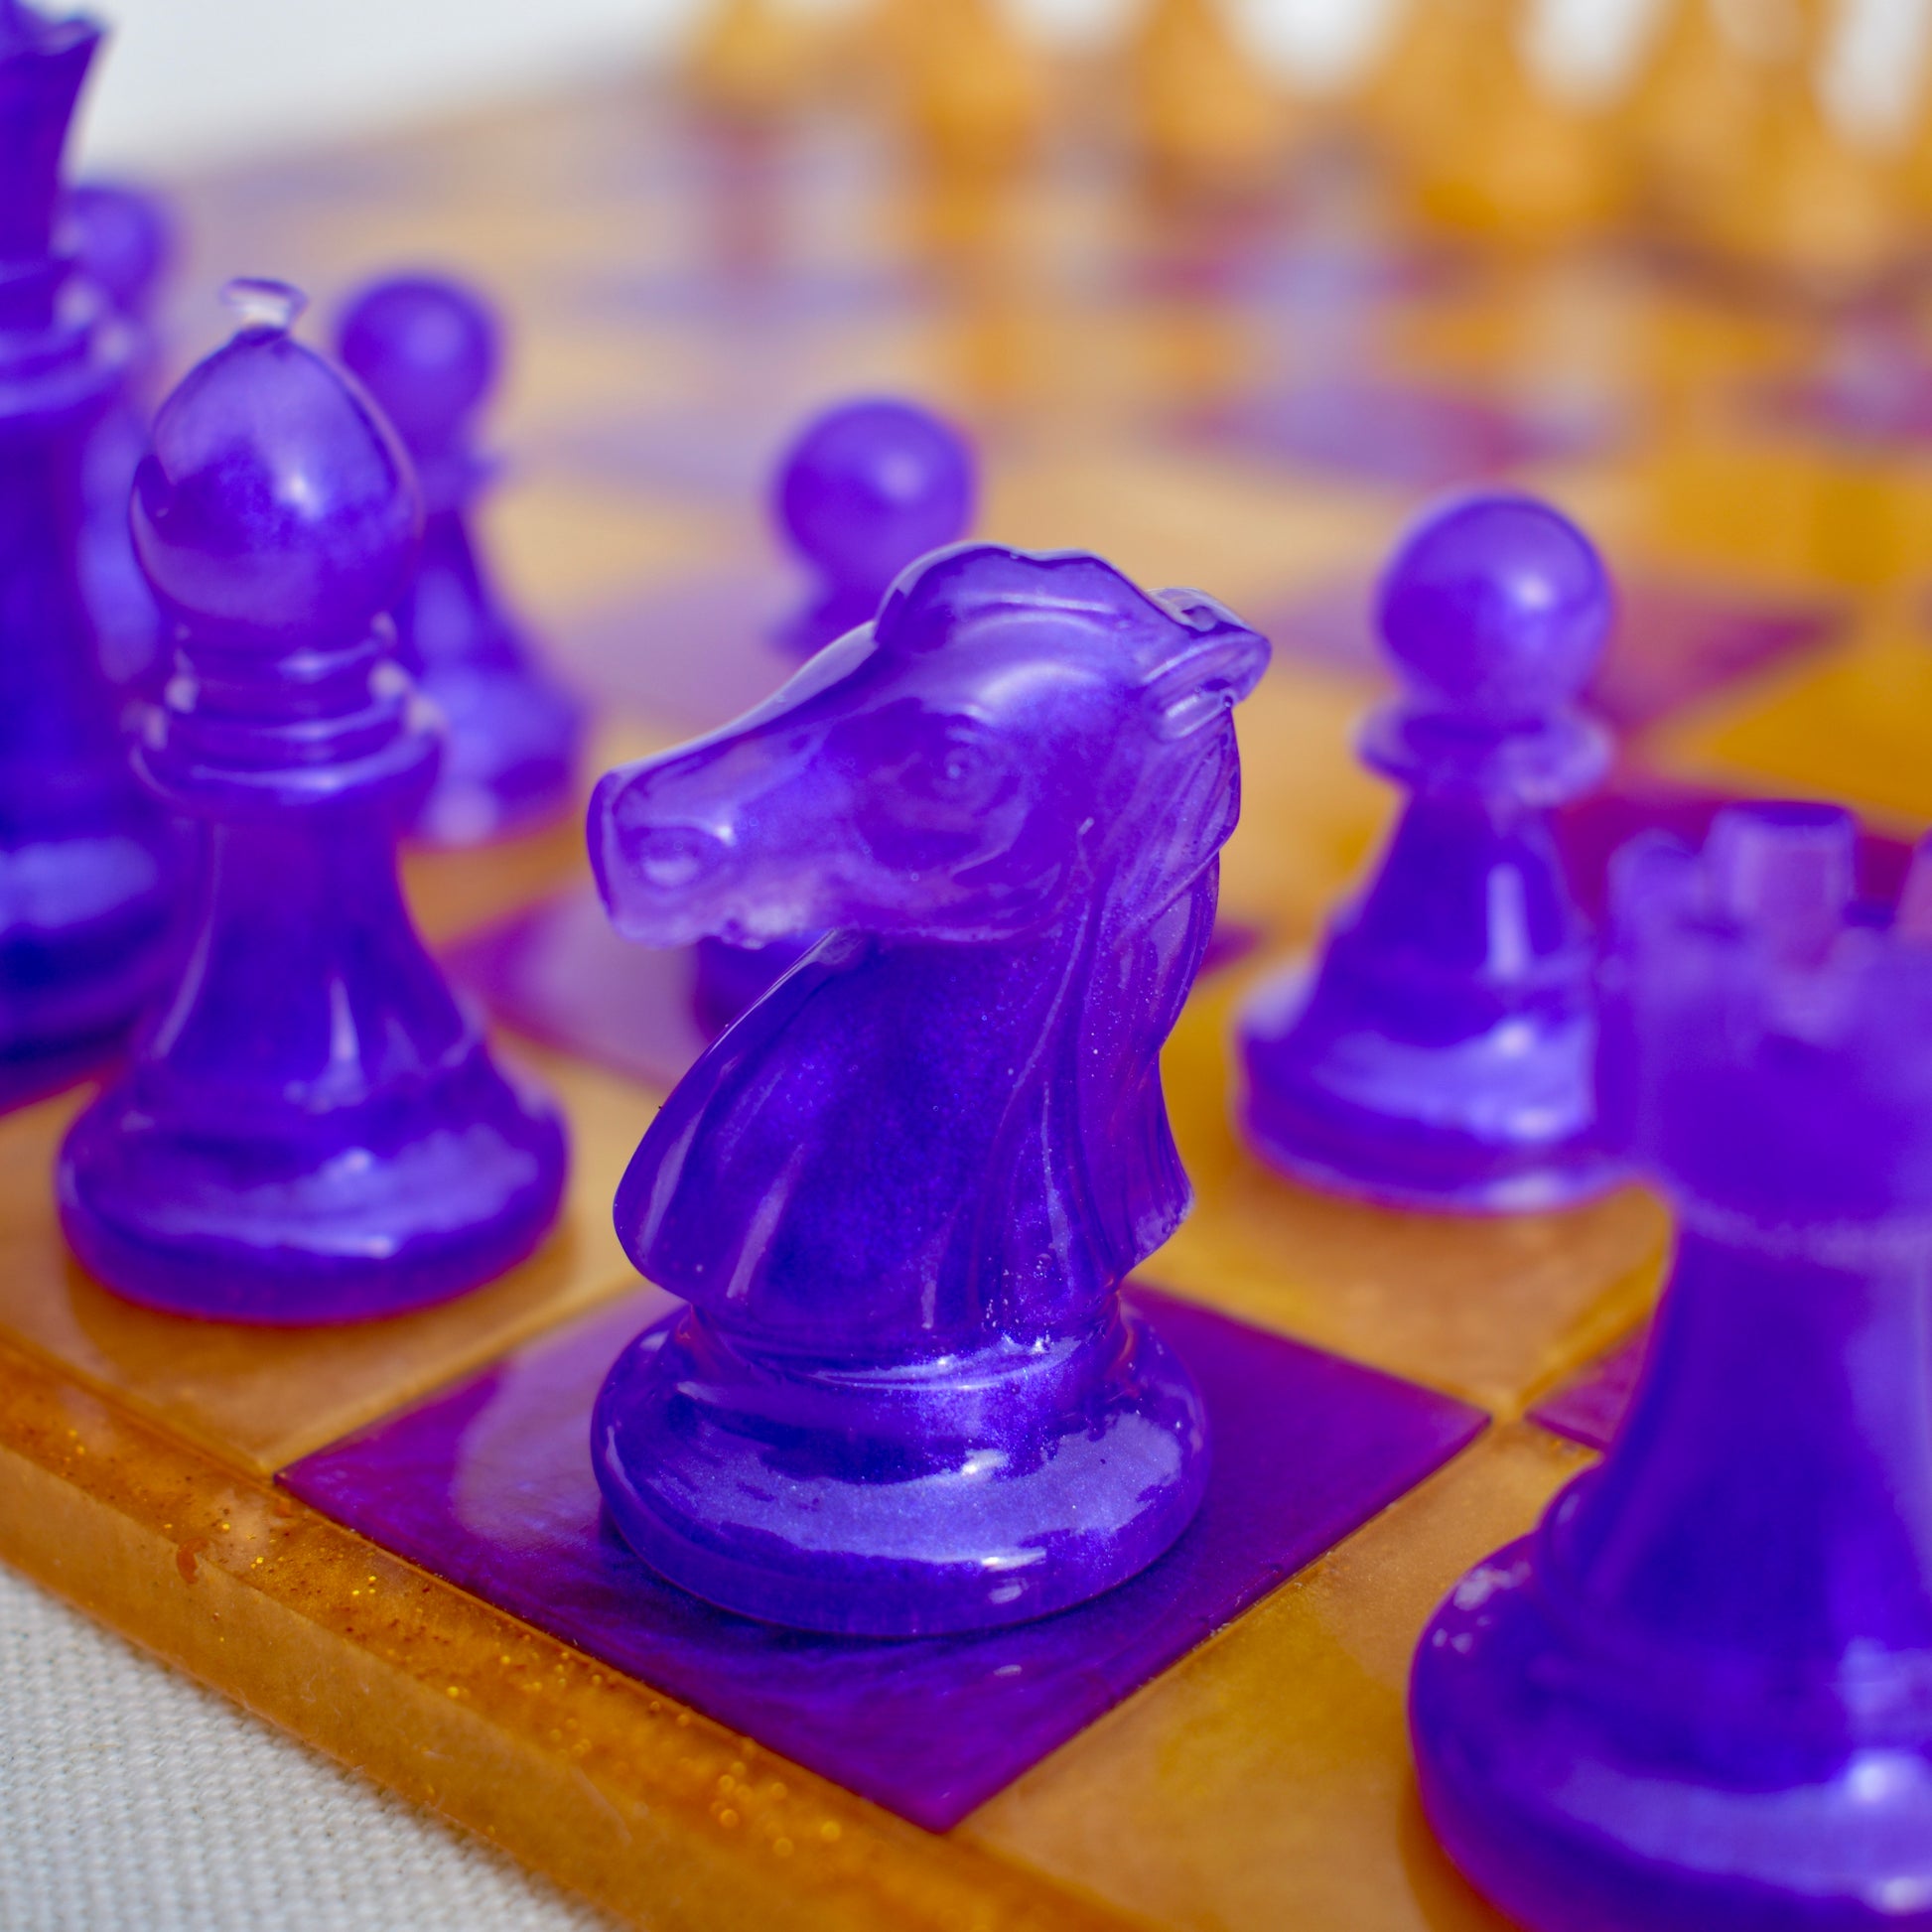 6 luxury chess sets to feed your 'Queen's Gambit' obsession